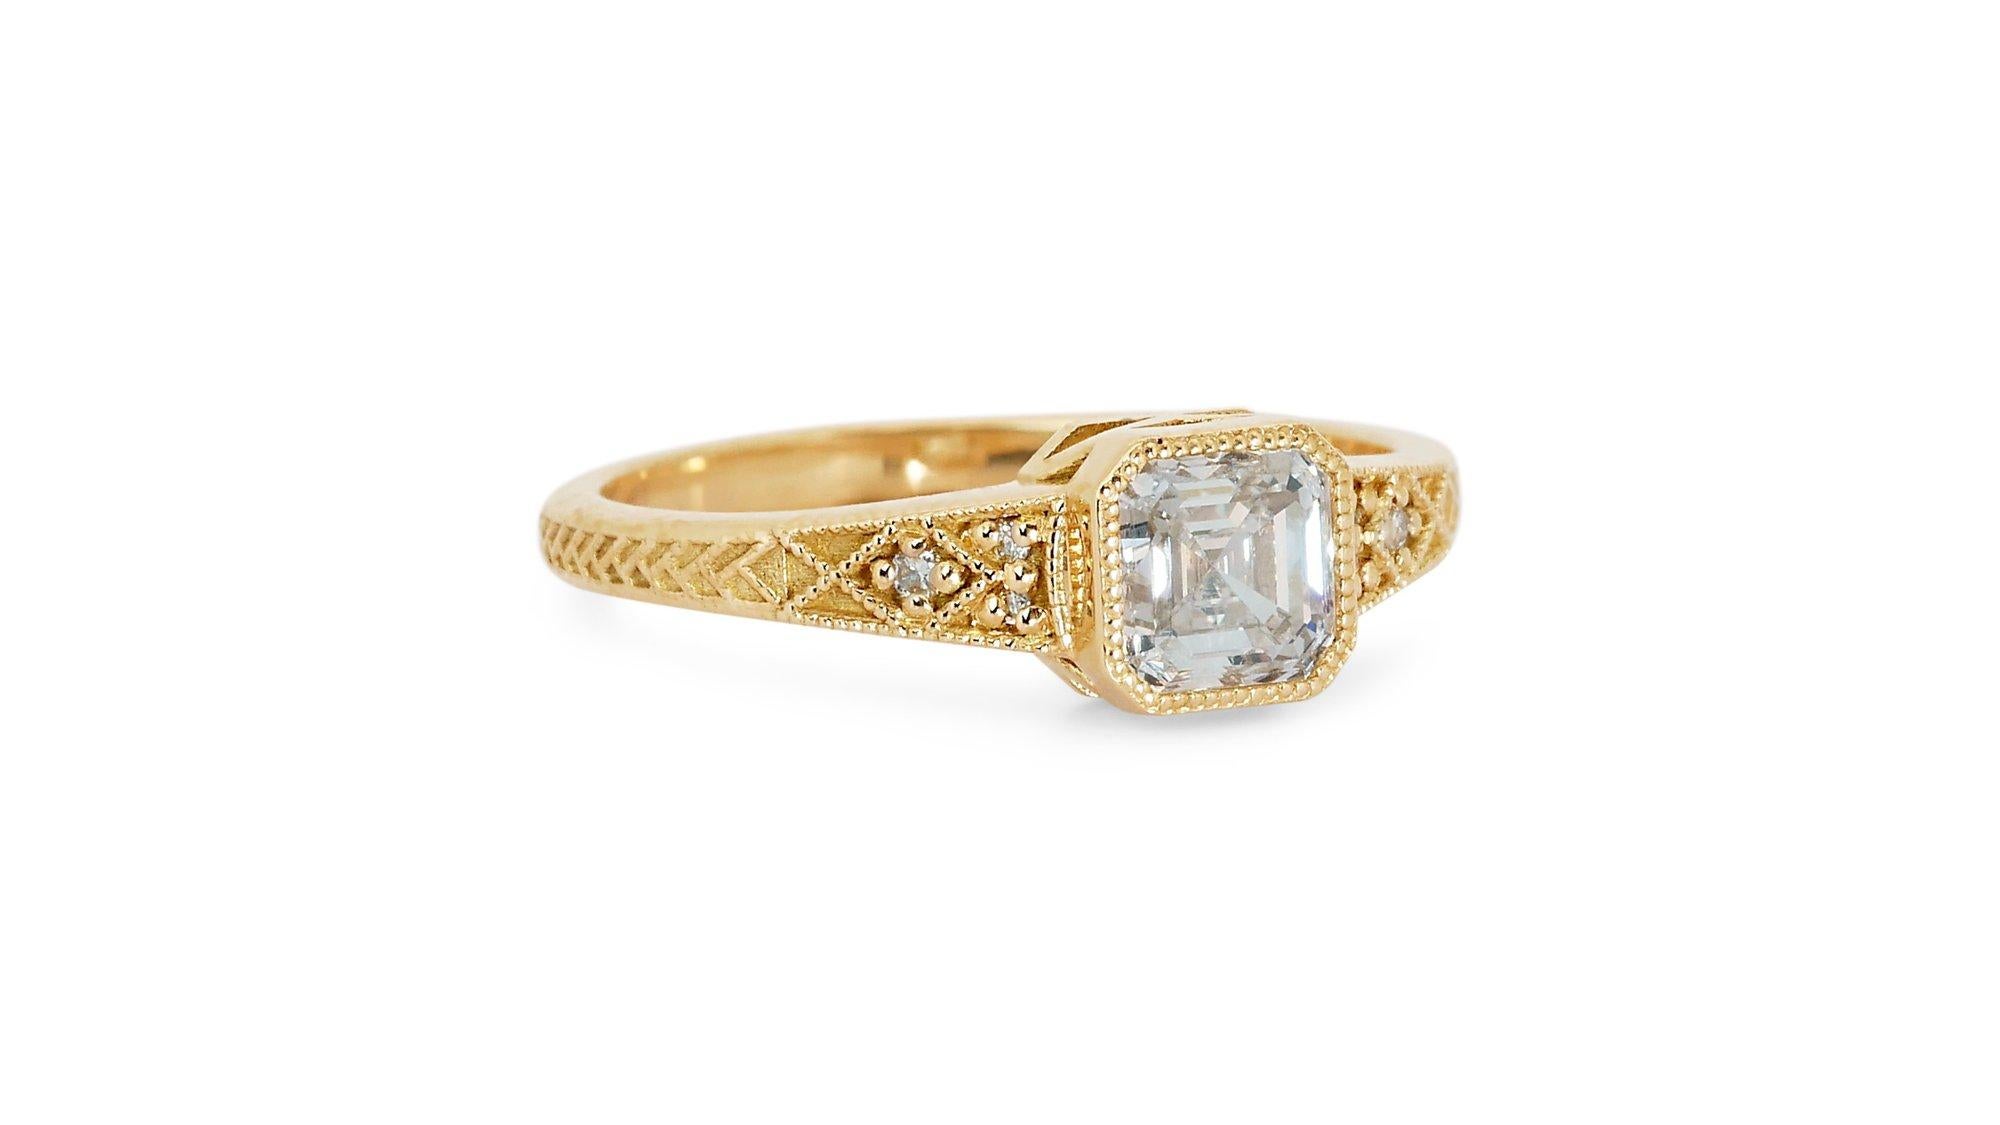 Dazzling 18K Yellow Gold Natural Diamond Vintage Ring w/1.05 Carat - GIA Certified

Embrace its vintage charm and make a lasting statement. This dazzling vintage ring showcases a stunning 1.02 carat center stone boasting an elegant Asscher cut.